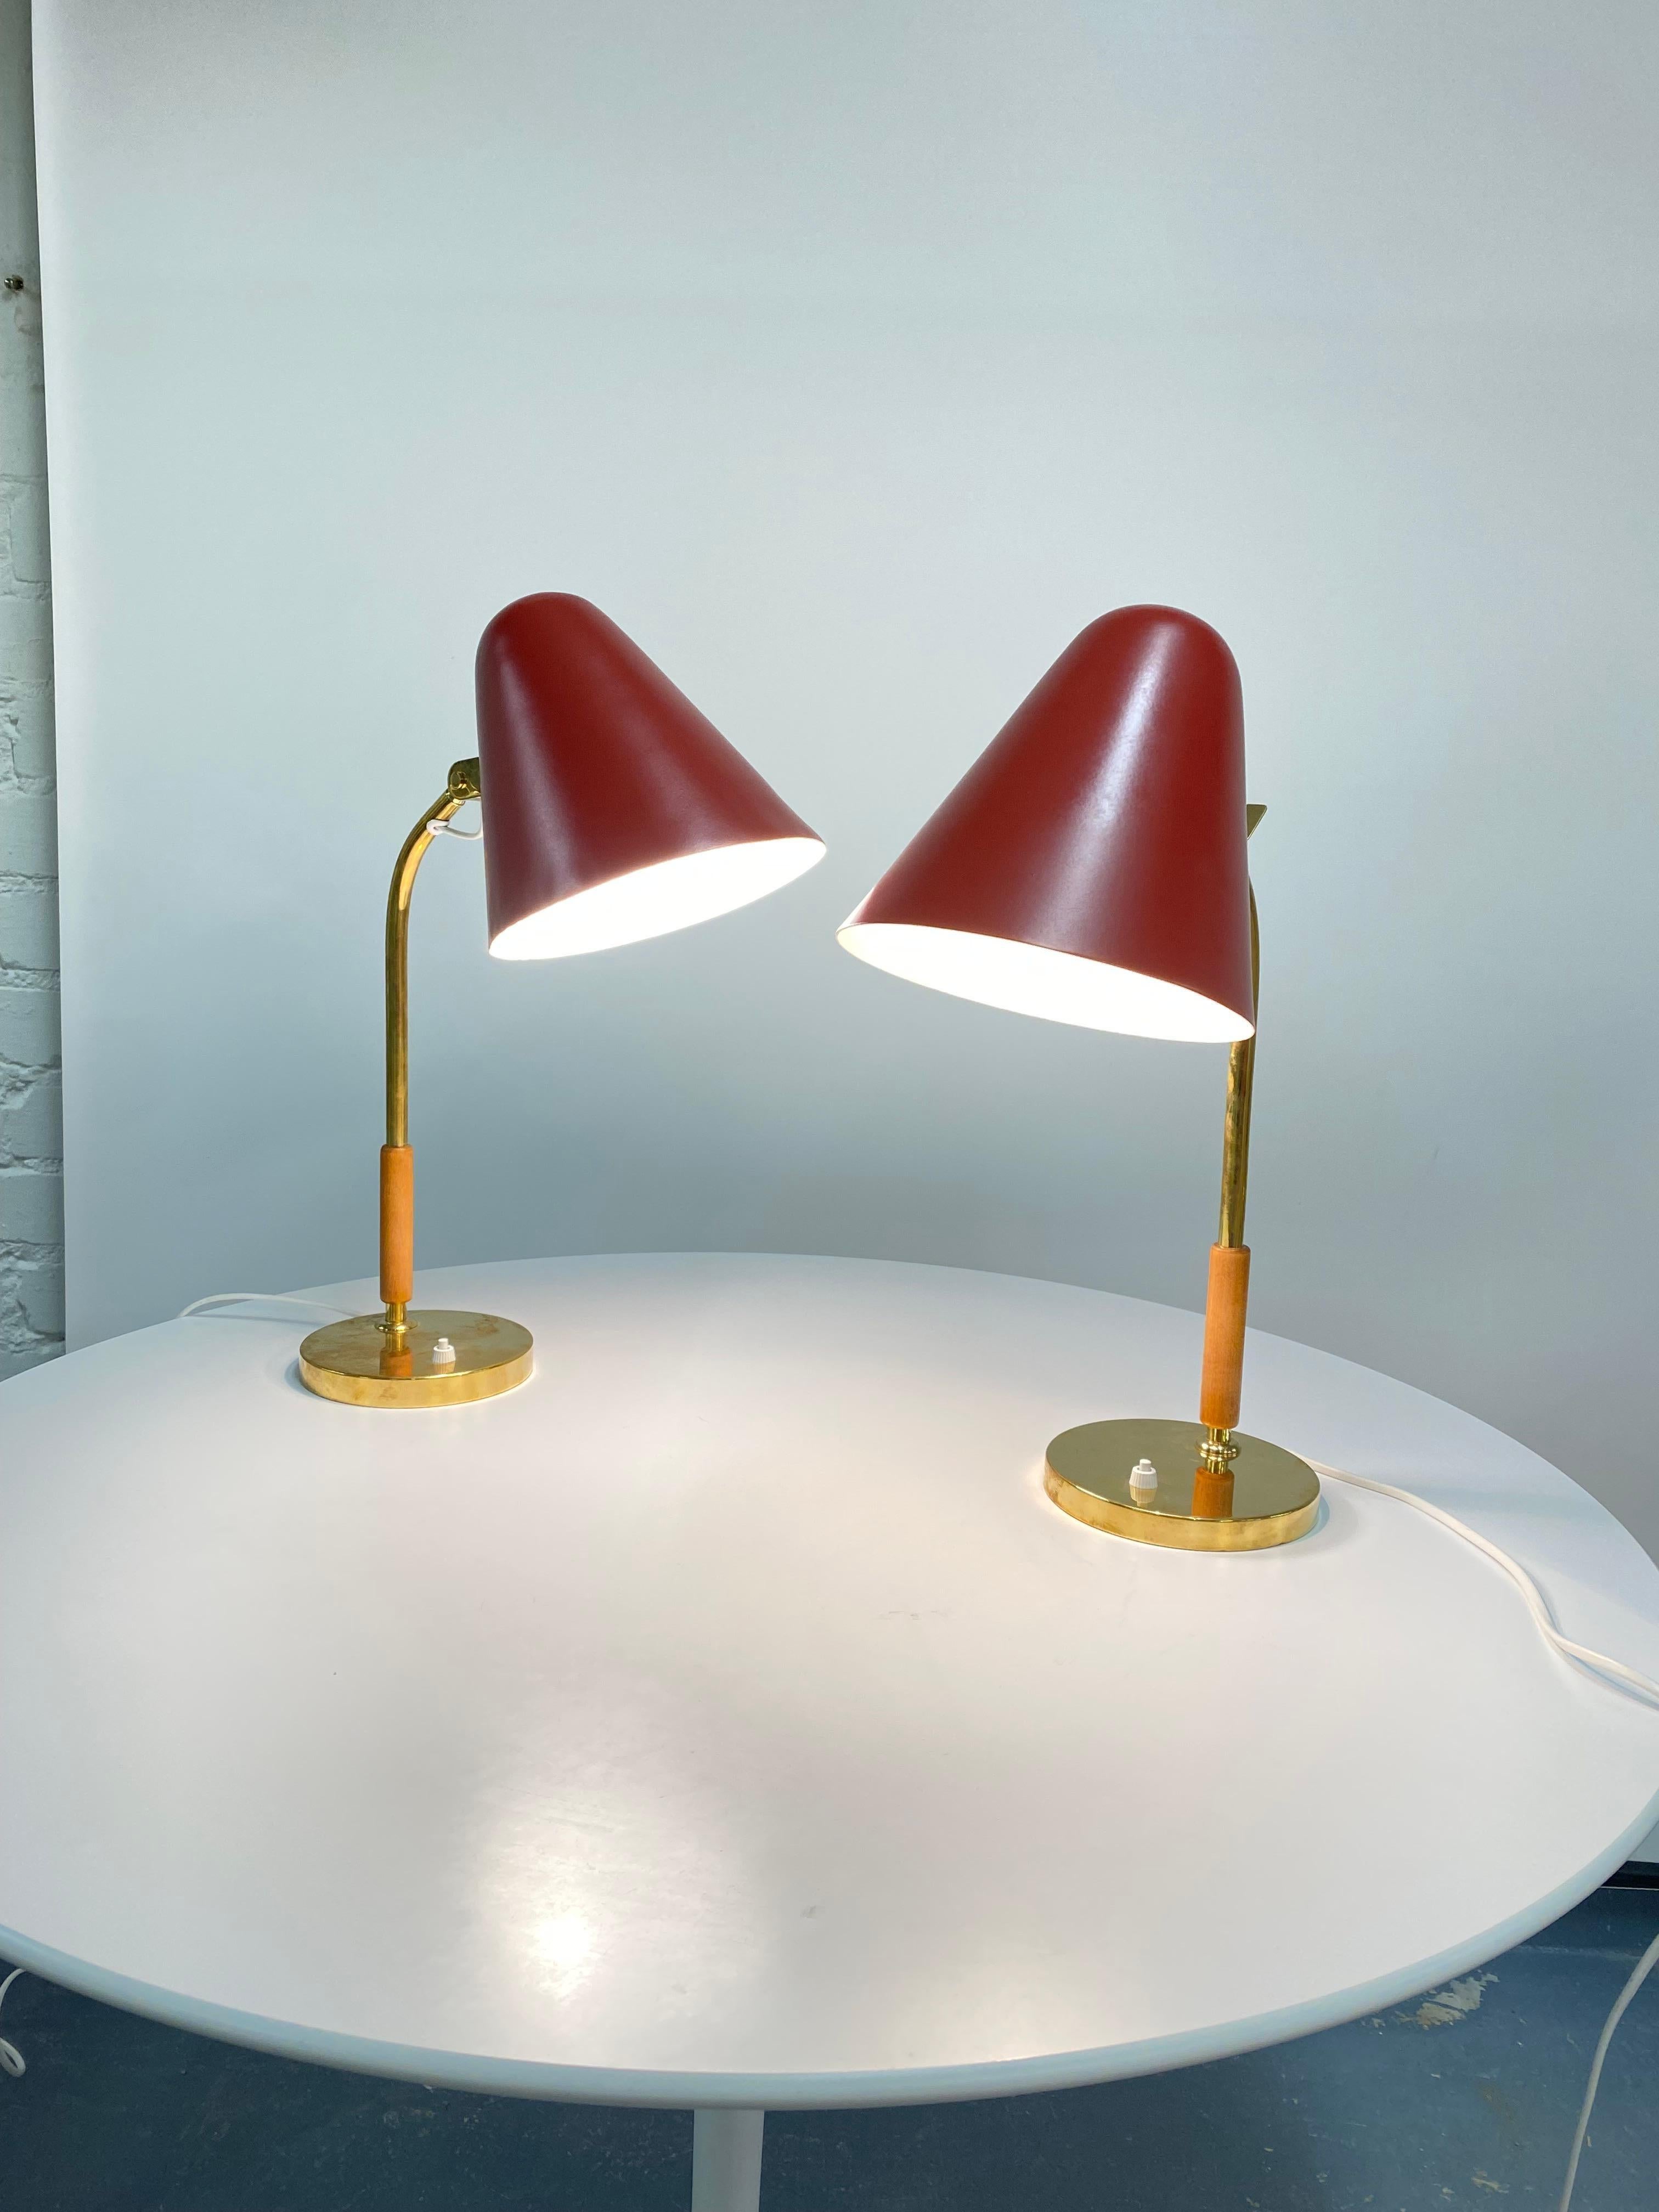 Scandinavian Modern A Pair of Paavo Tynell Table lamps, Model no. 5233, 1950s, Taito Oy For Sale